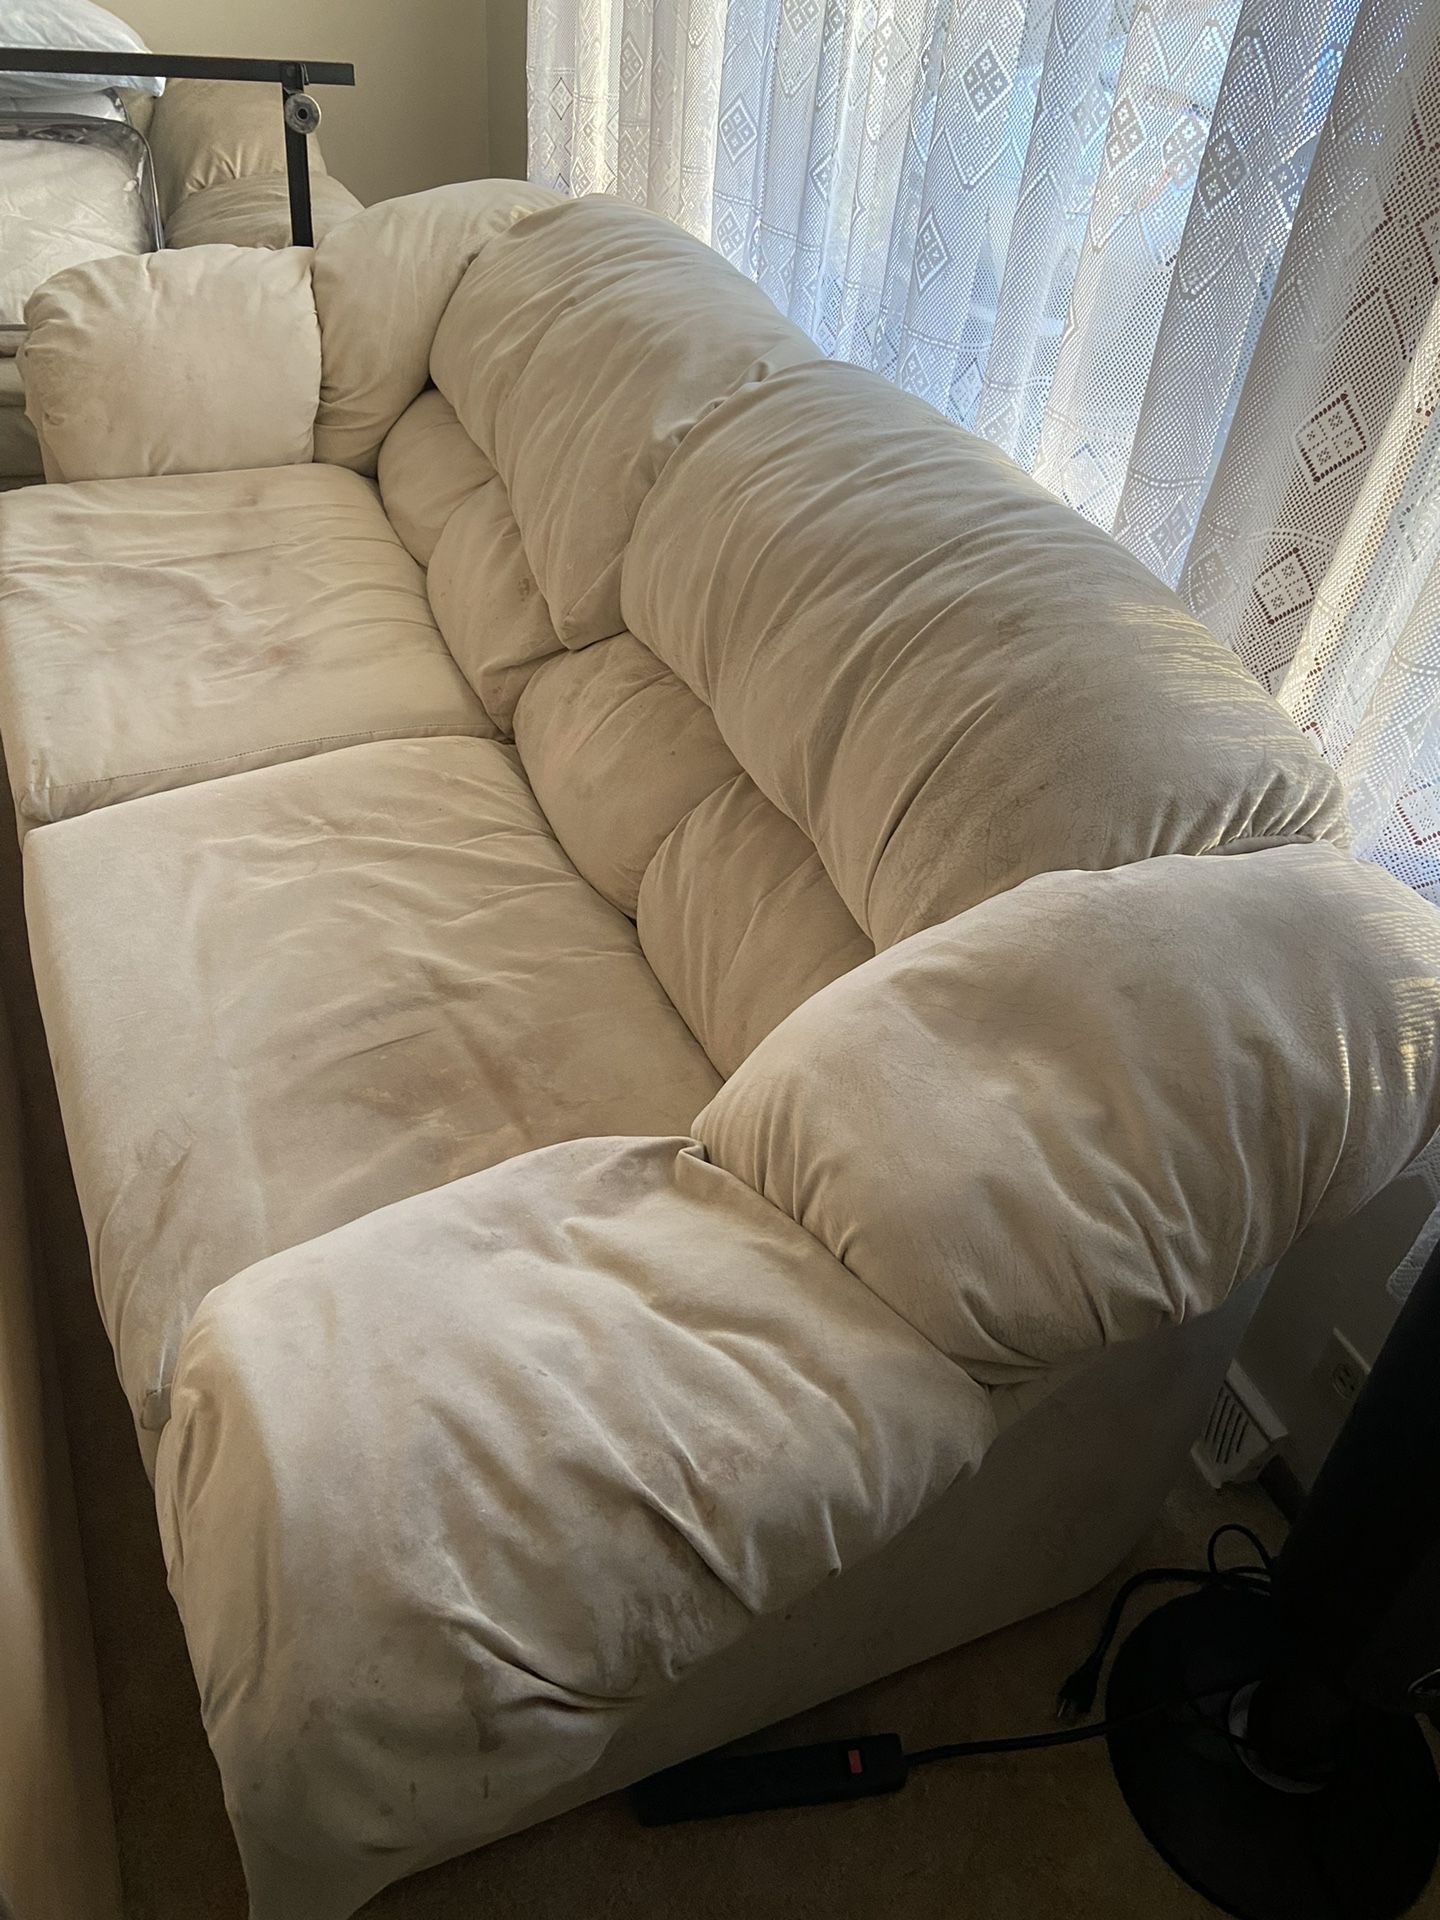 Suede Couch Small 